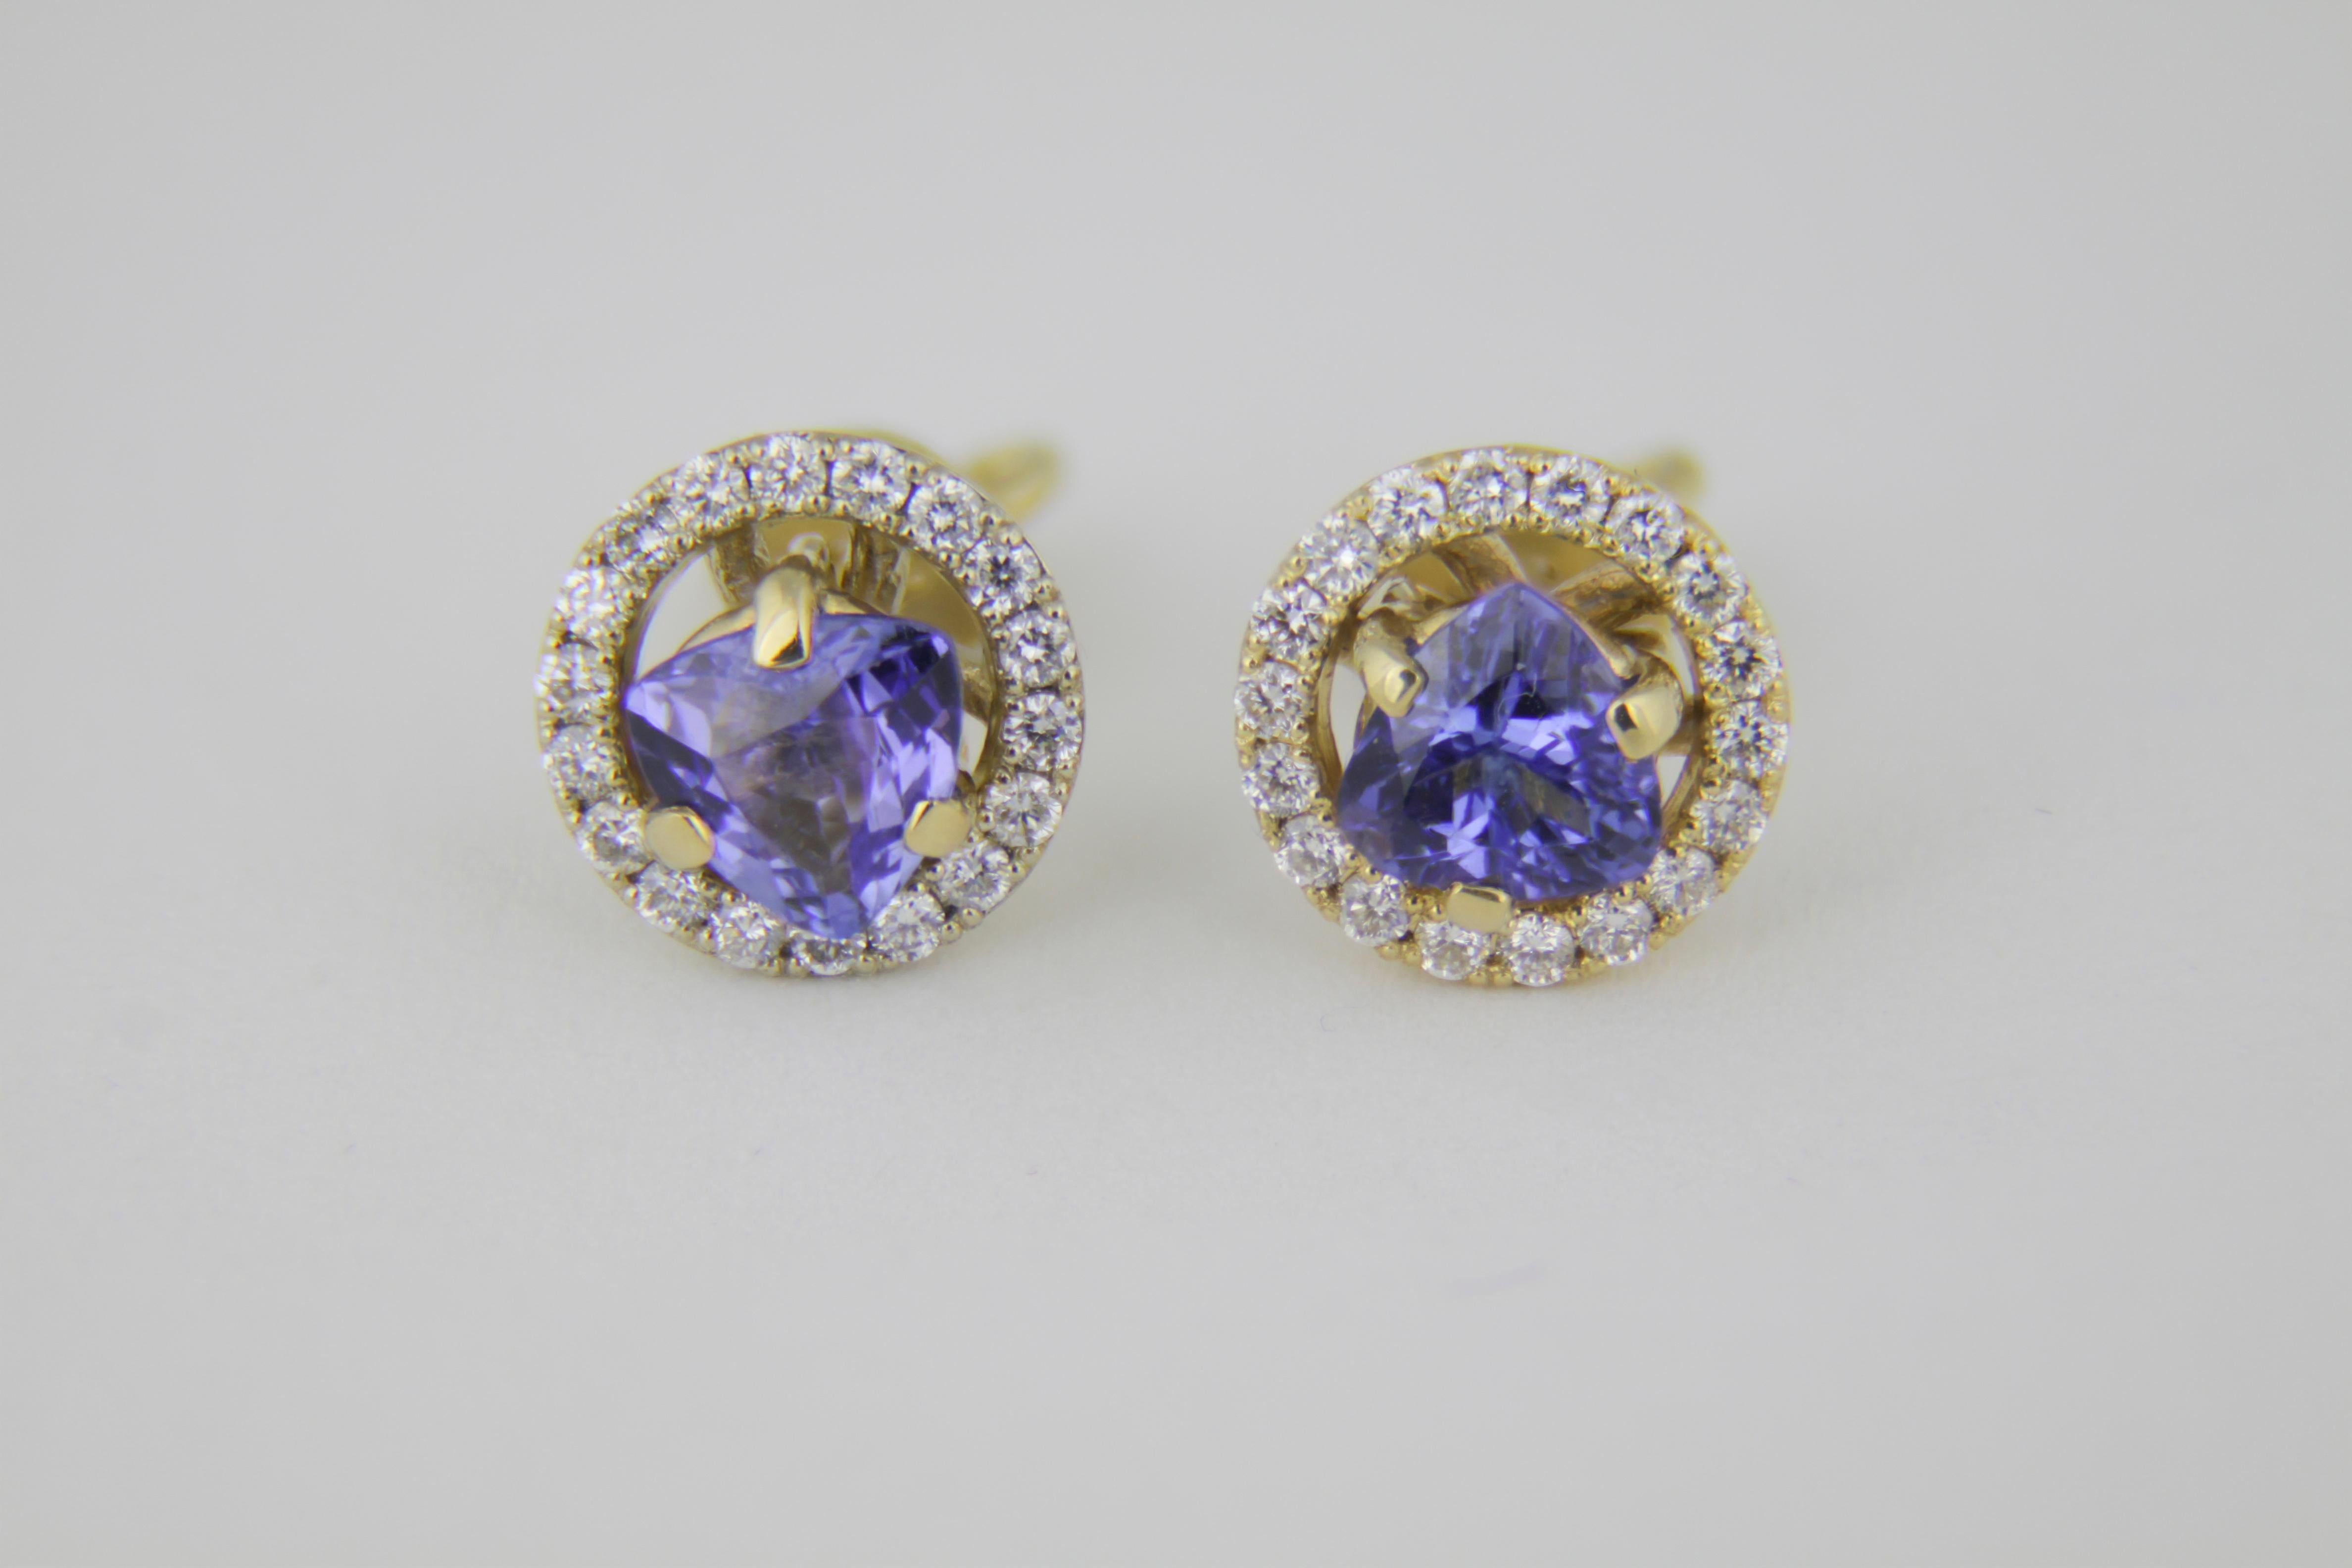 Tanzanites and diamonds 14k gold earrings studs. 
Removable jackets tanzanite earrings.Tanzanite Halo Jacket Stud Earrings. 14k White Gold Natural Tanzanite Studs with Halo Jackets.

Metal type: Gold
Metal stamp: 14k Gold
Weight: 2.5 gr
Central